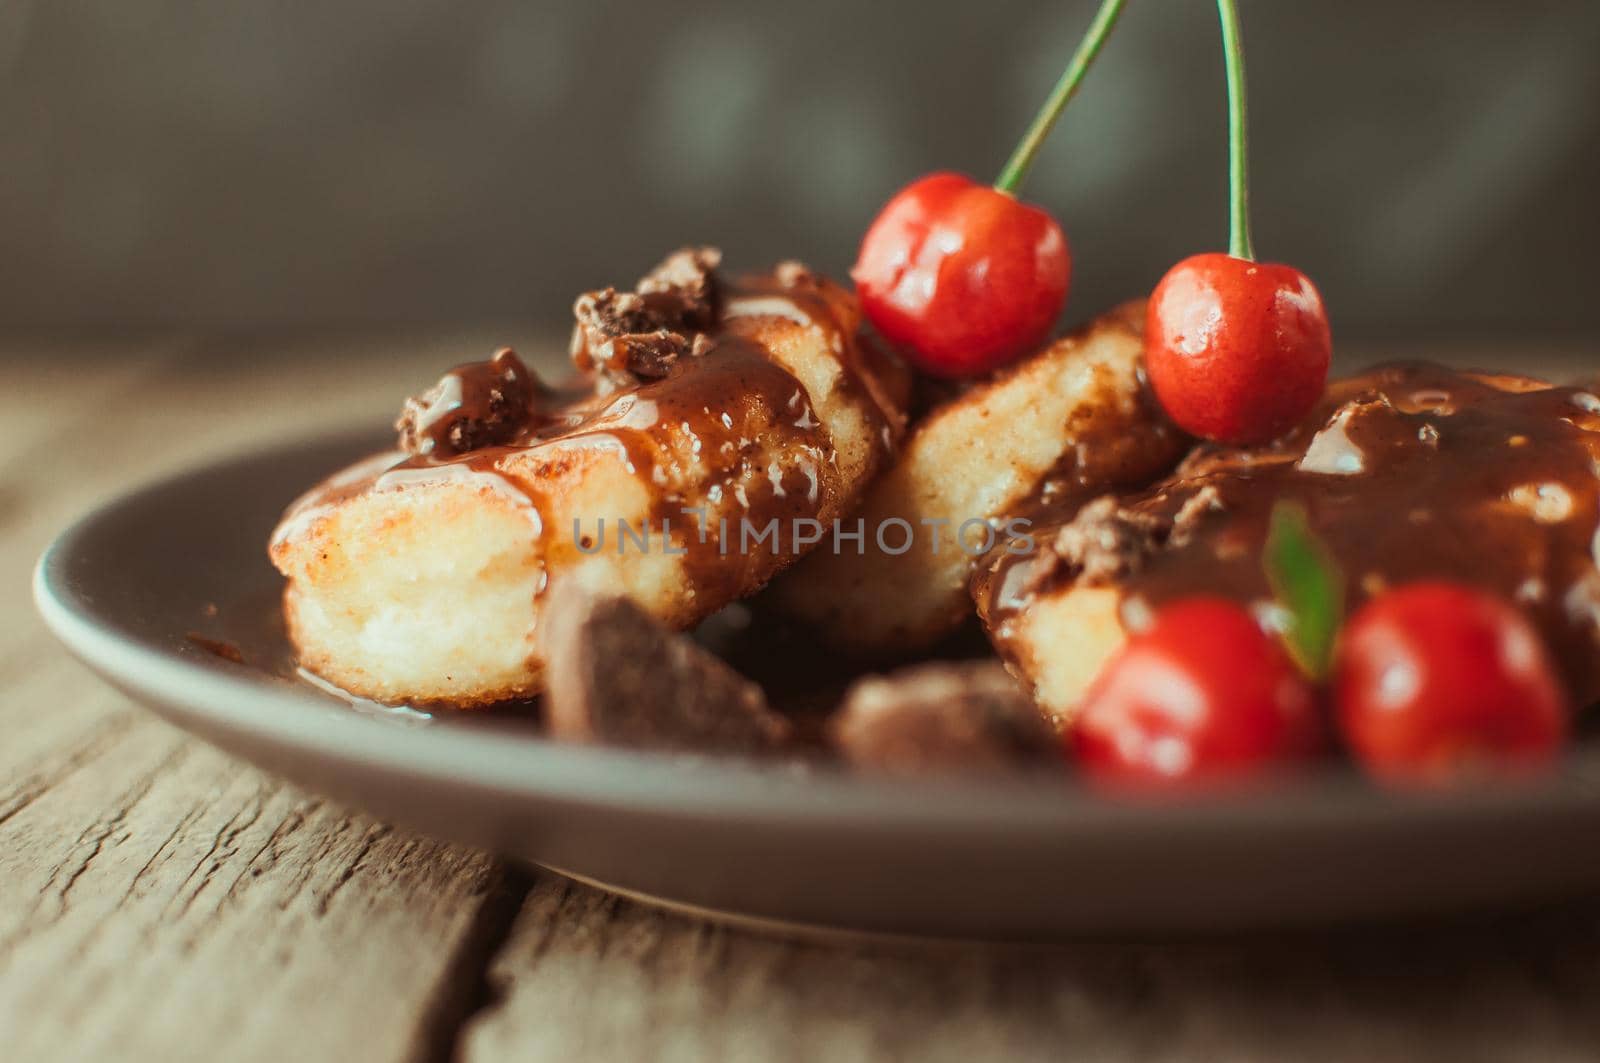 Gourmet breakfast - curd pancakes, cheesecakes, curd pancakes with cherries and chocolate in a brown plate. Wholesome dessert on a wooden table in a rustic style. Selective focus